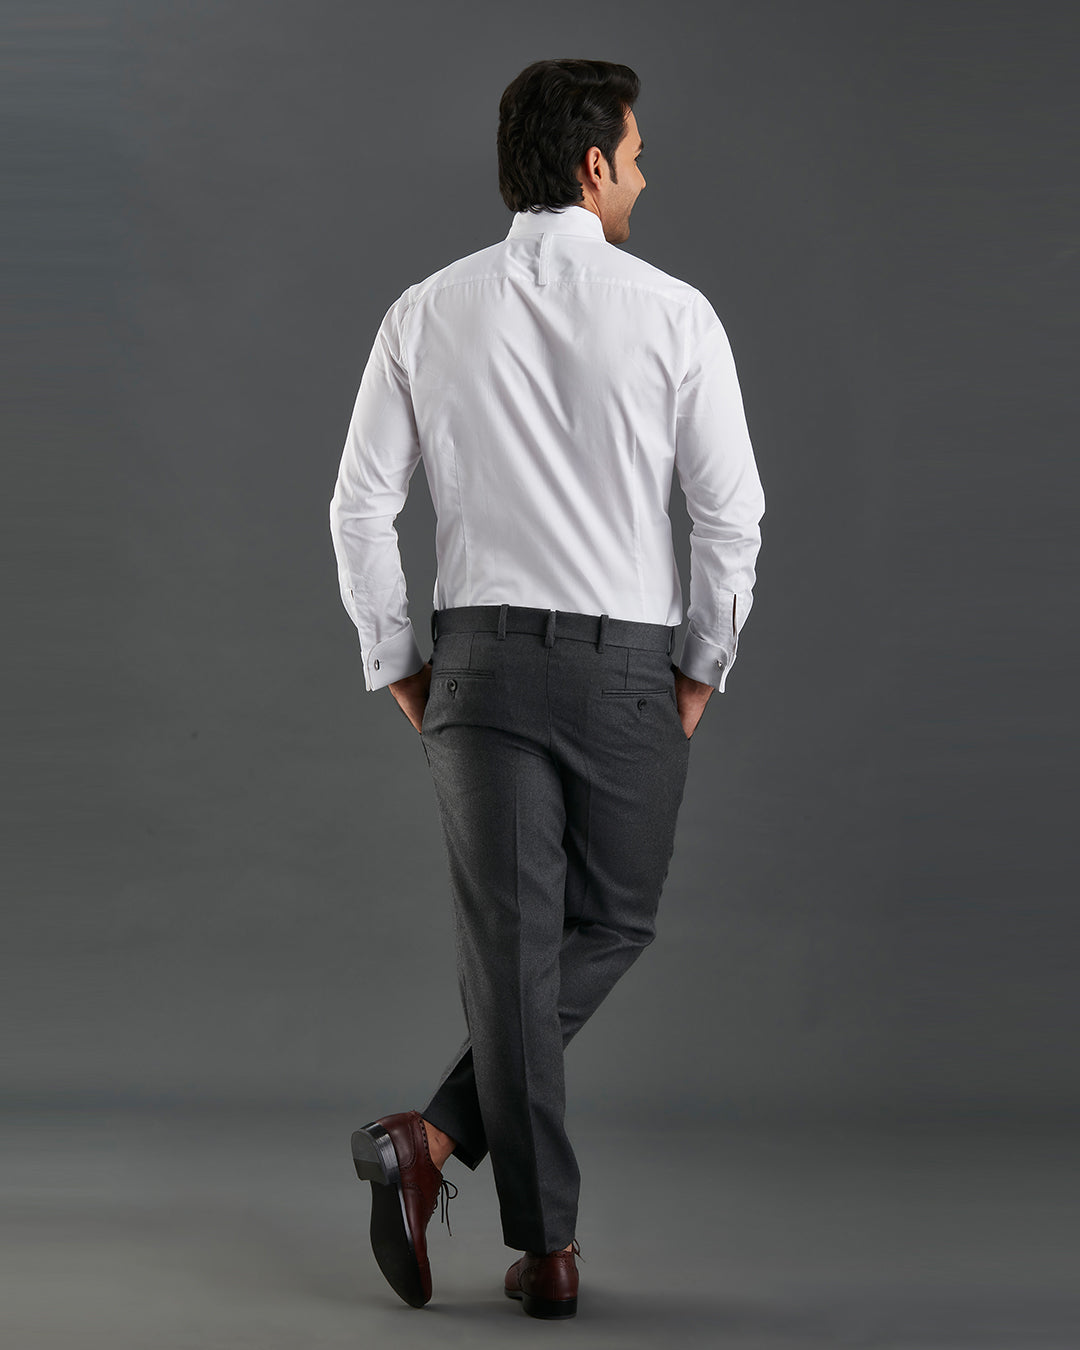 Back of model wearing mens tuxedo shirt by Luxire in white with black bow tie hands in pockets